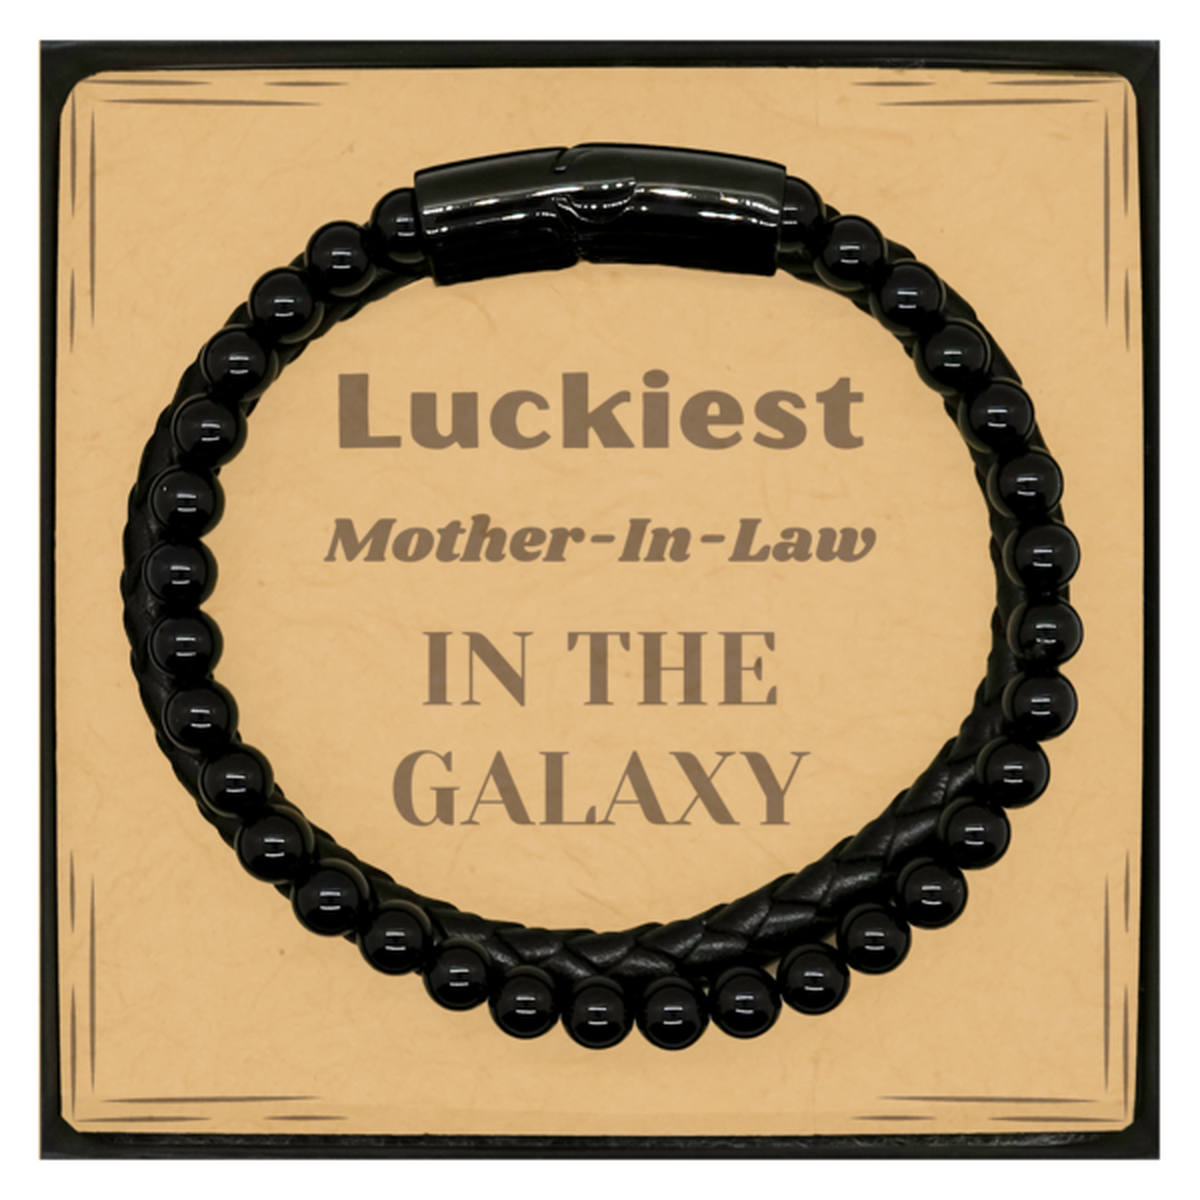 Luckiest Mother-In-Law in the Galaxy, To My Mother-In-Law Message Card Gifts, Christmas Mother-In-Law Stone Leather Bracelets Gifts, X-mas Birthday Unique Gifts For Mother-In-Law Men Women